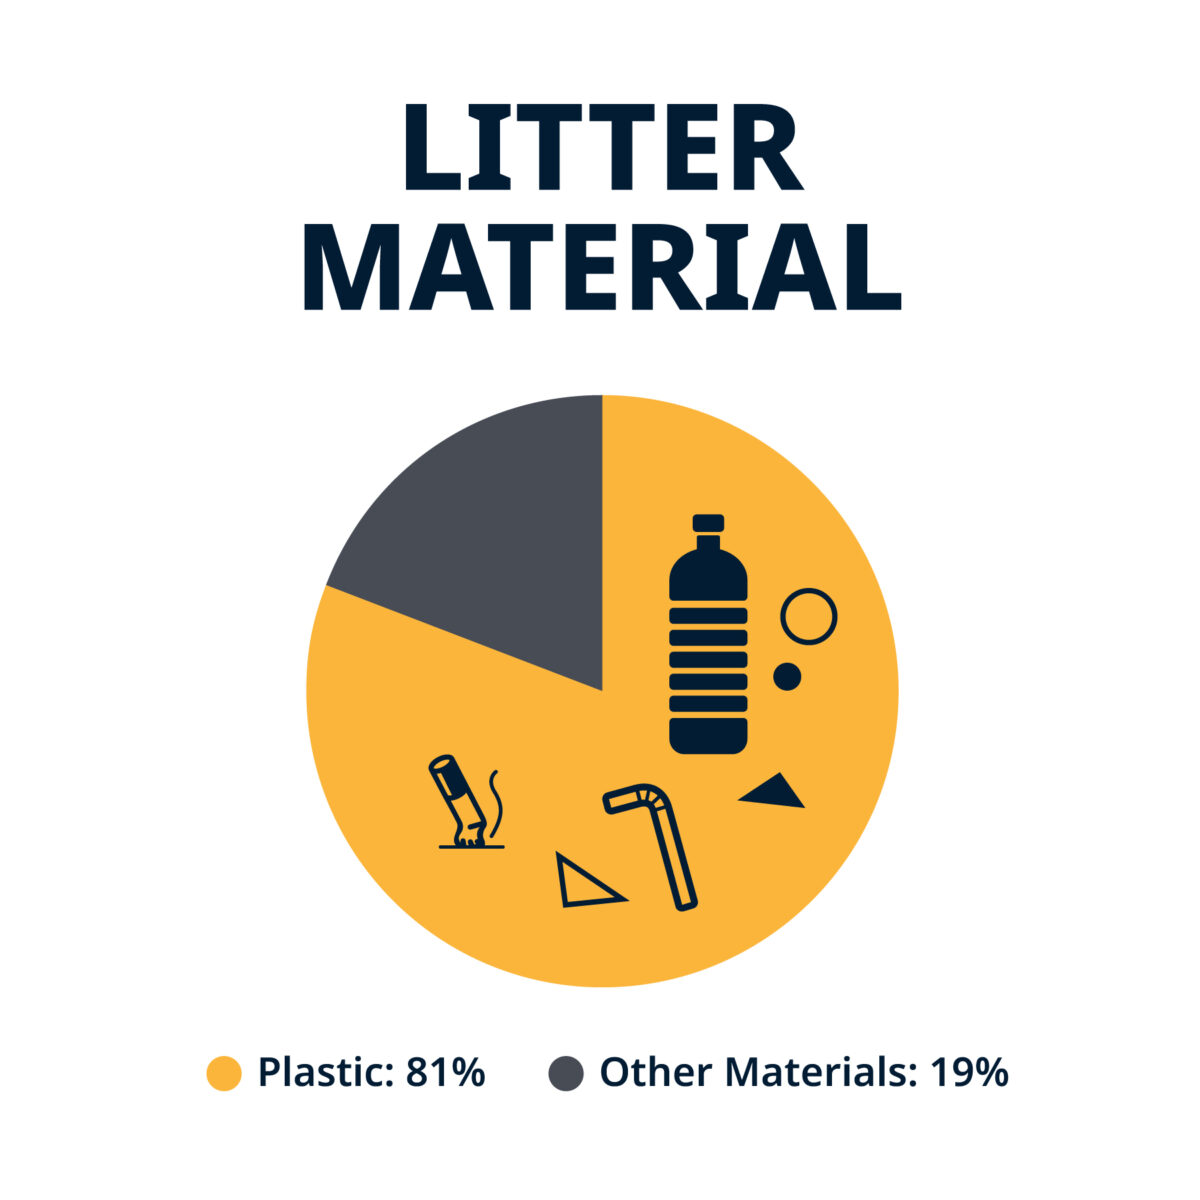 Litter material. Plastic: 81%. Other materials: 19%.